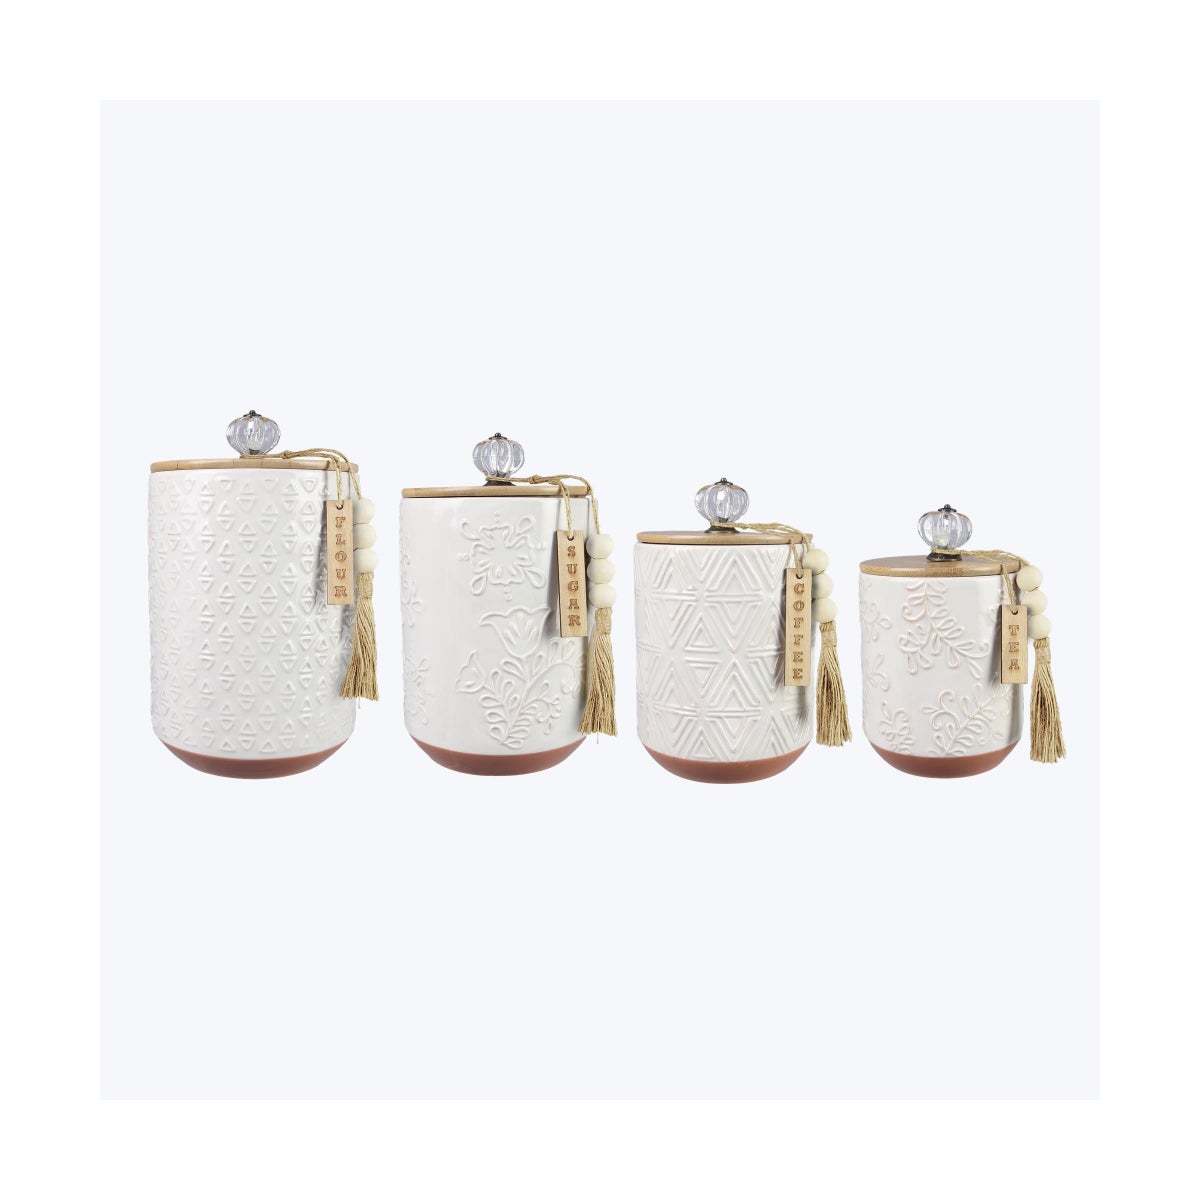 Ceramic Canister with Wood Lid/Silicone Seal. Crystal Knob & Blessing Bead Tassel Accent, 4 pc/set